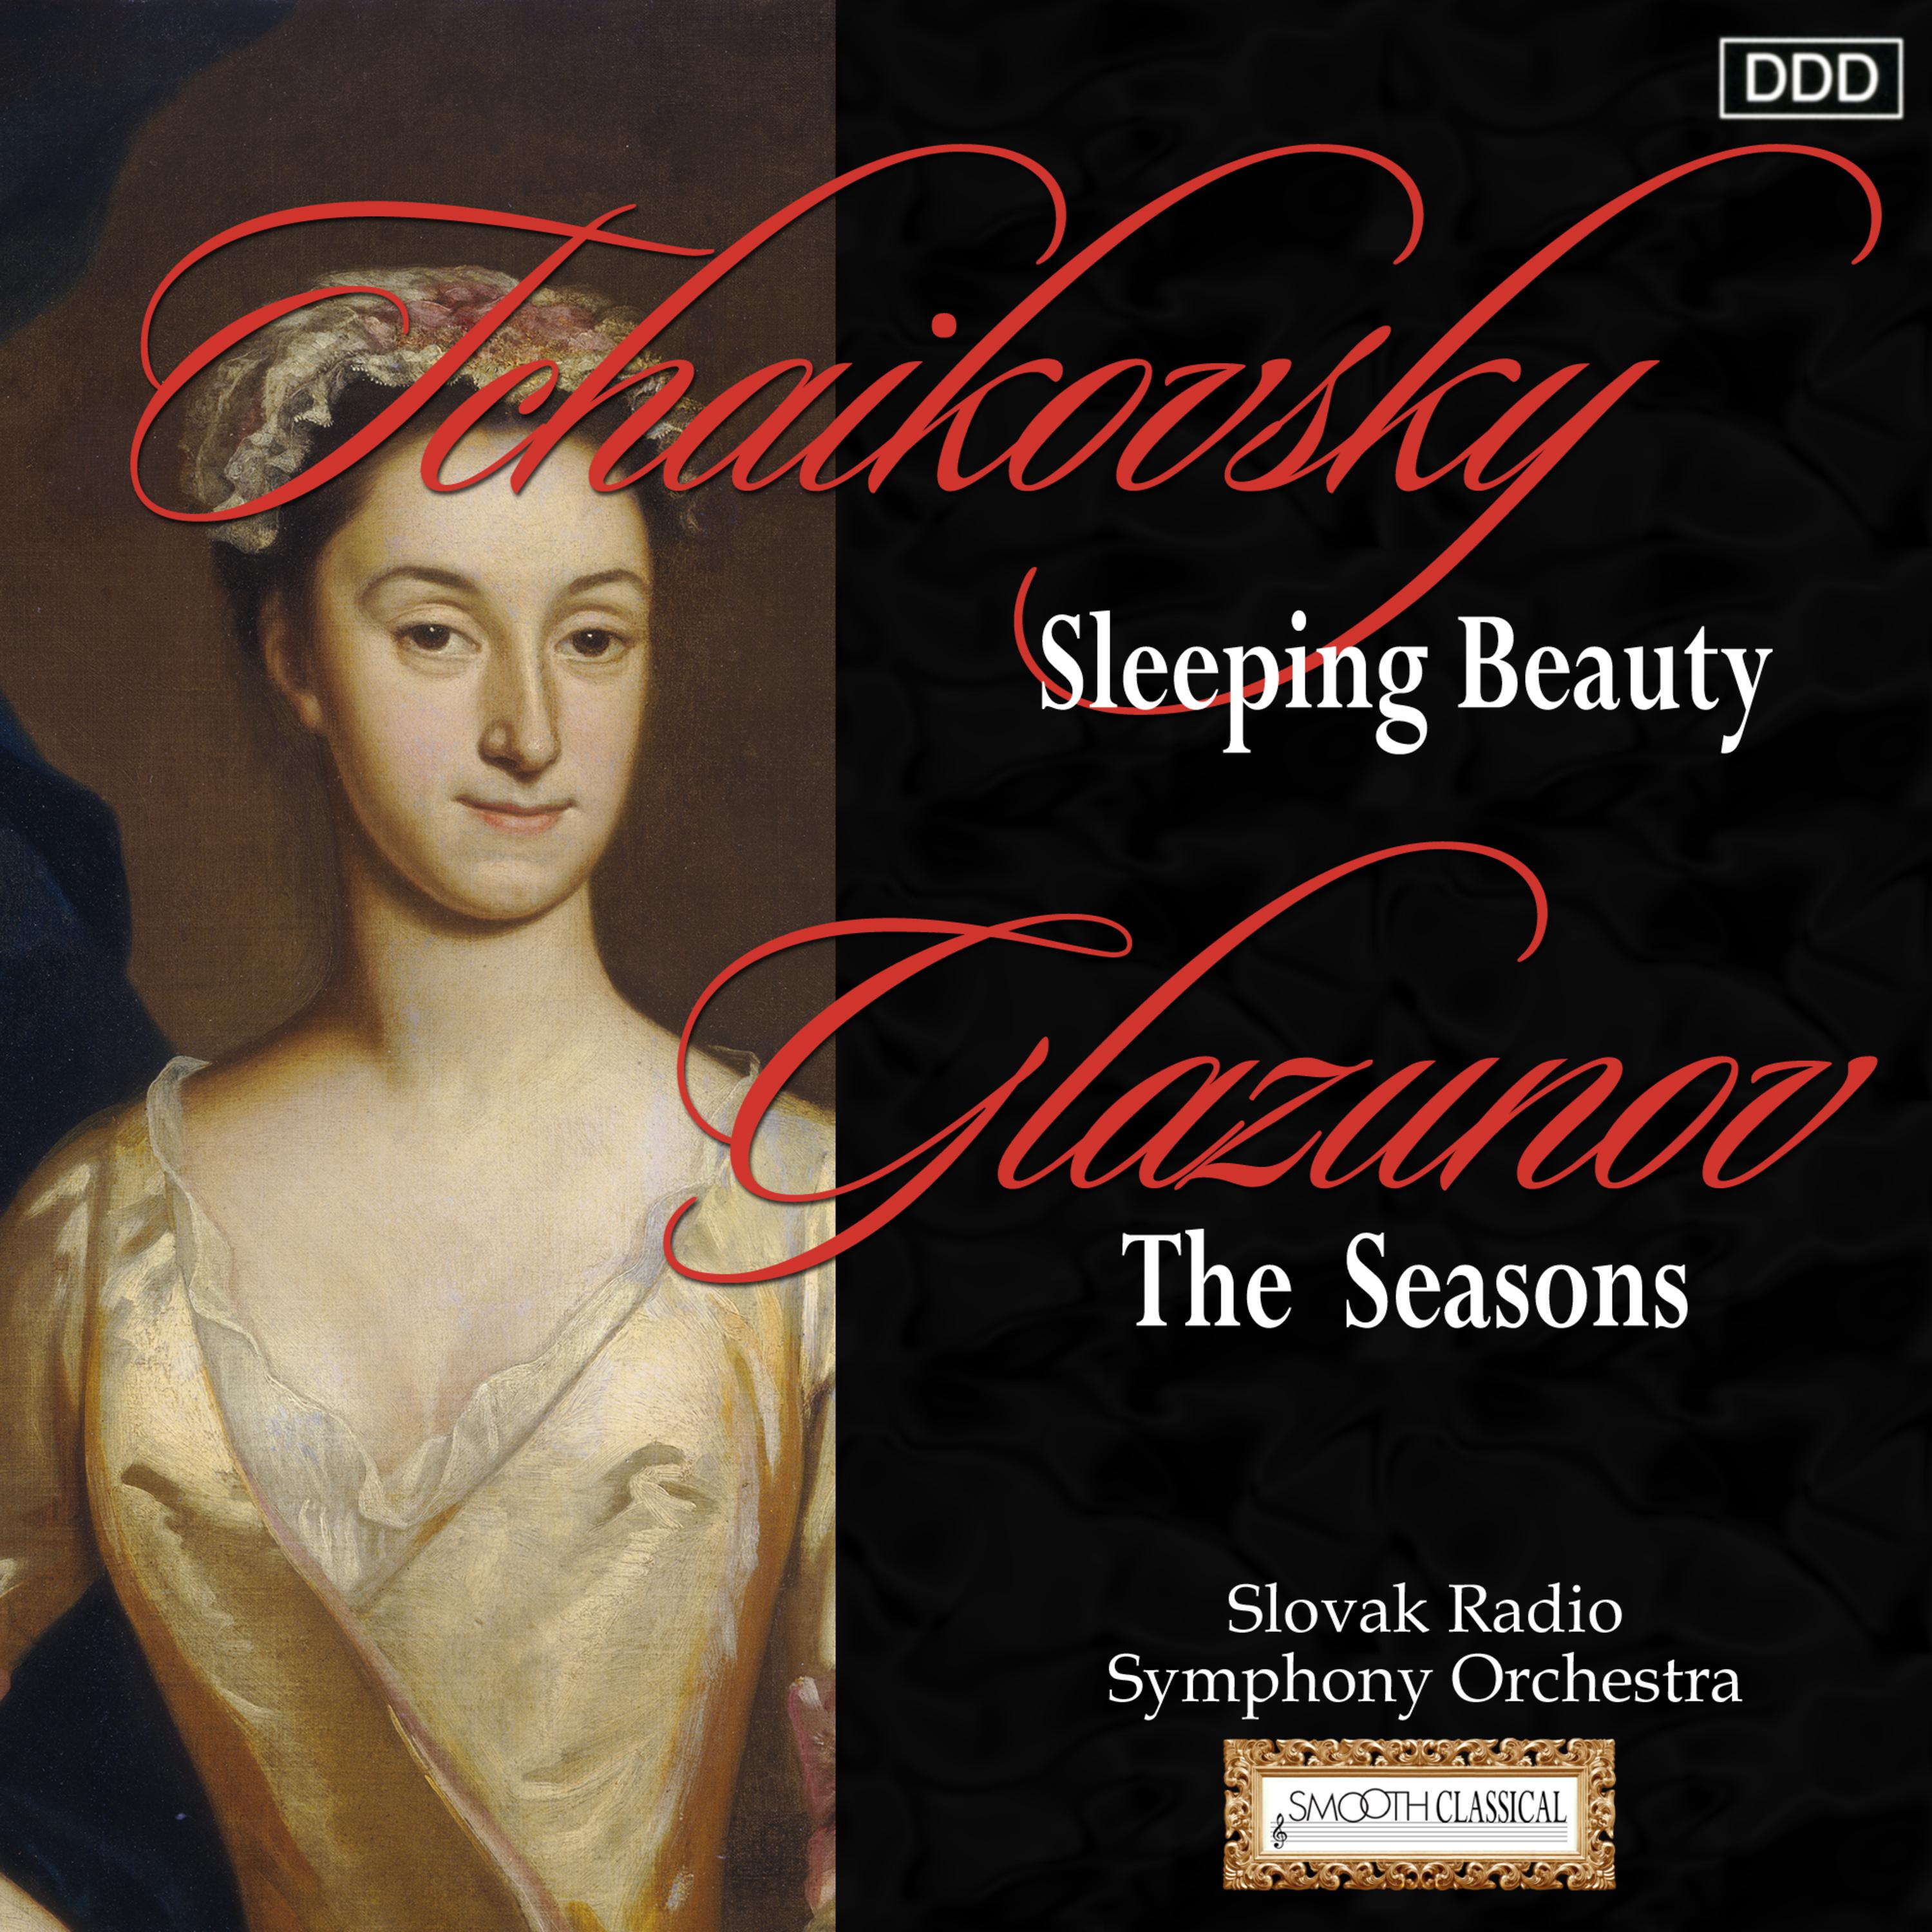 Vremena goda, Op. 67: Autumn. Bacchanale and Appearance of the Seasons